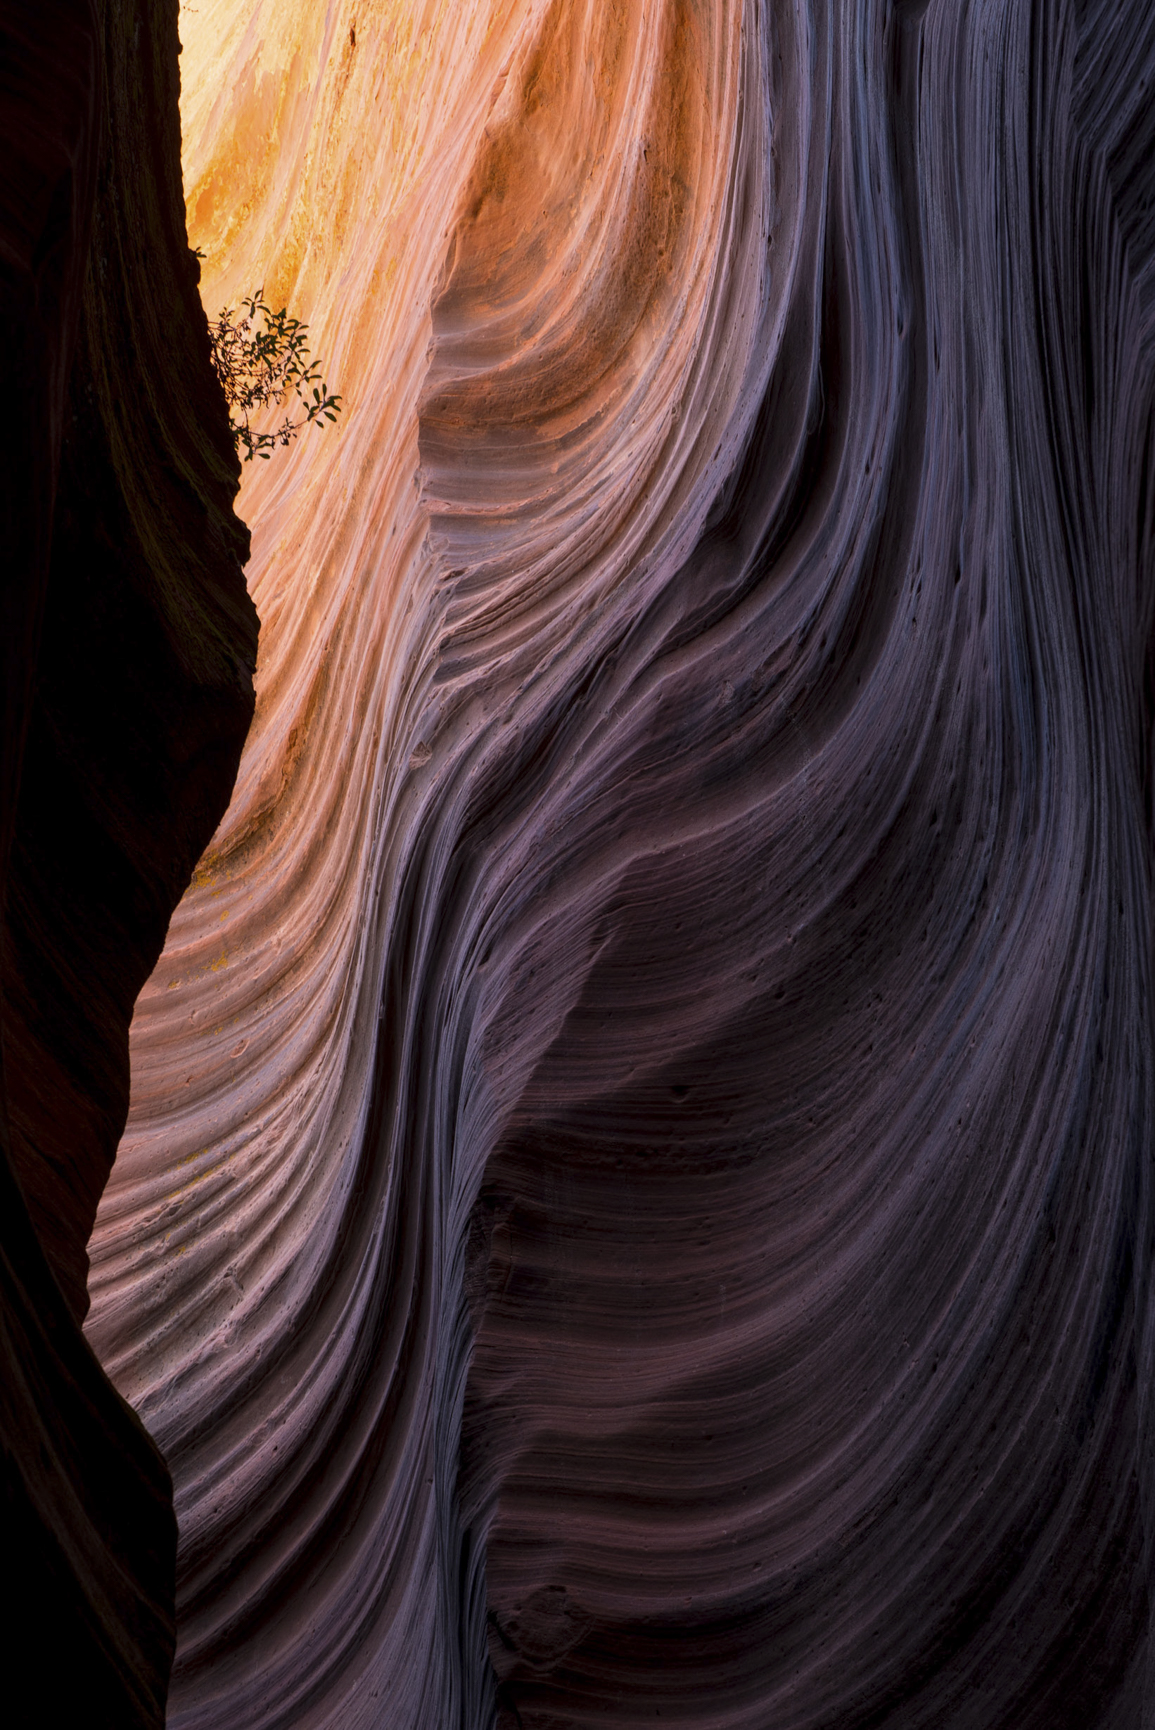 Slot Canyon Photo Tour with Reflected Light